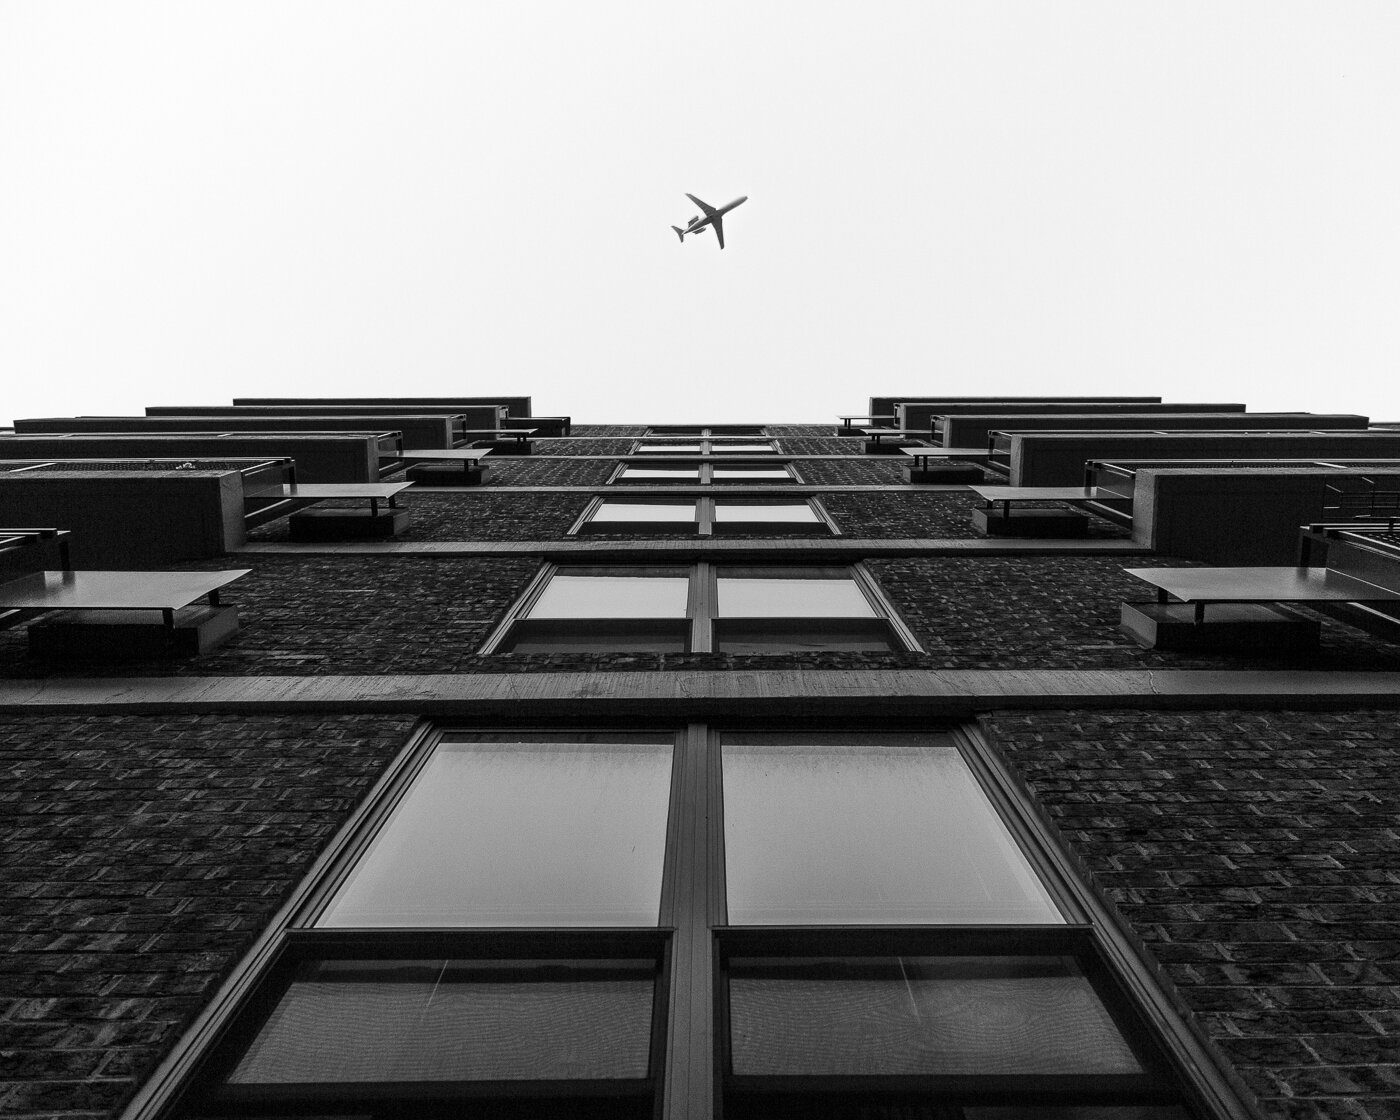 building and plane-2.jpg